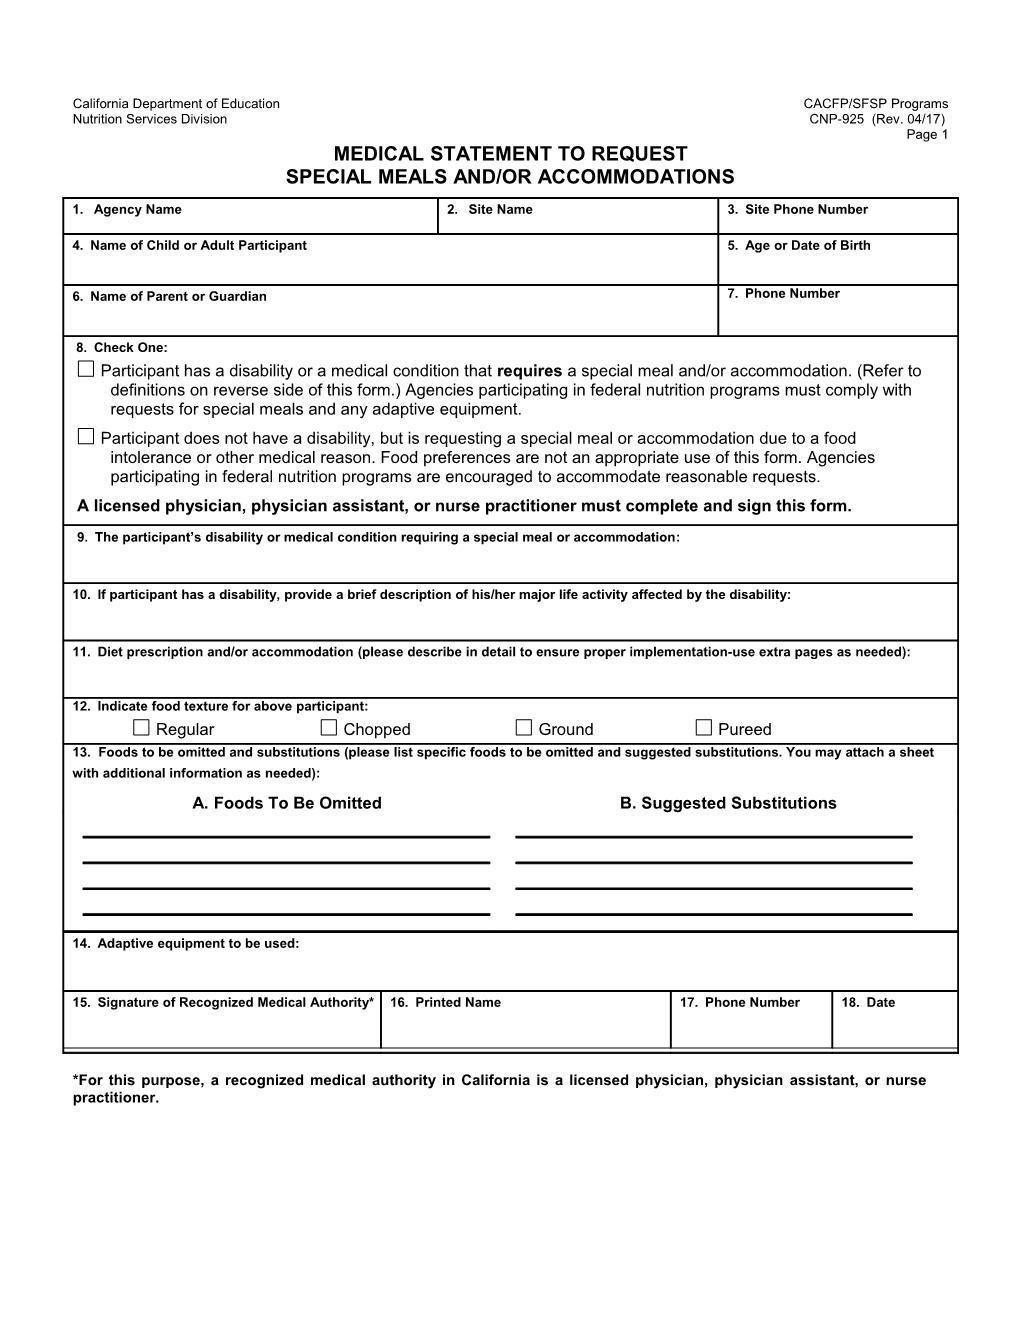 Medical Statement Form for CACFP and SFSP - USDA Civil Rights (CA Dept of Education)